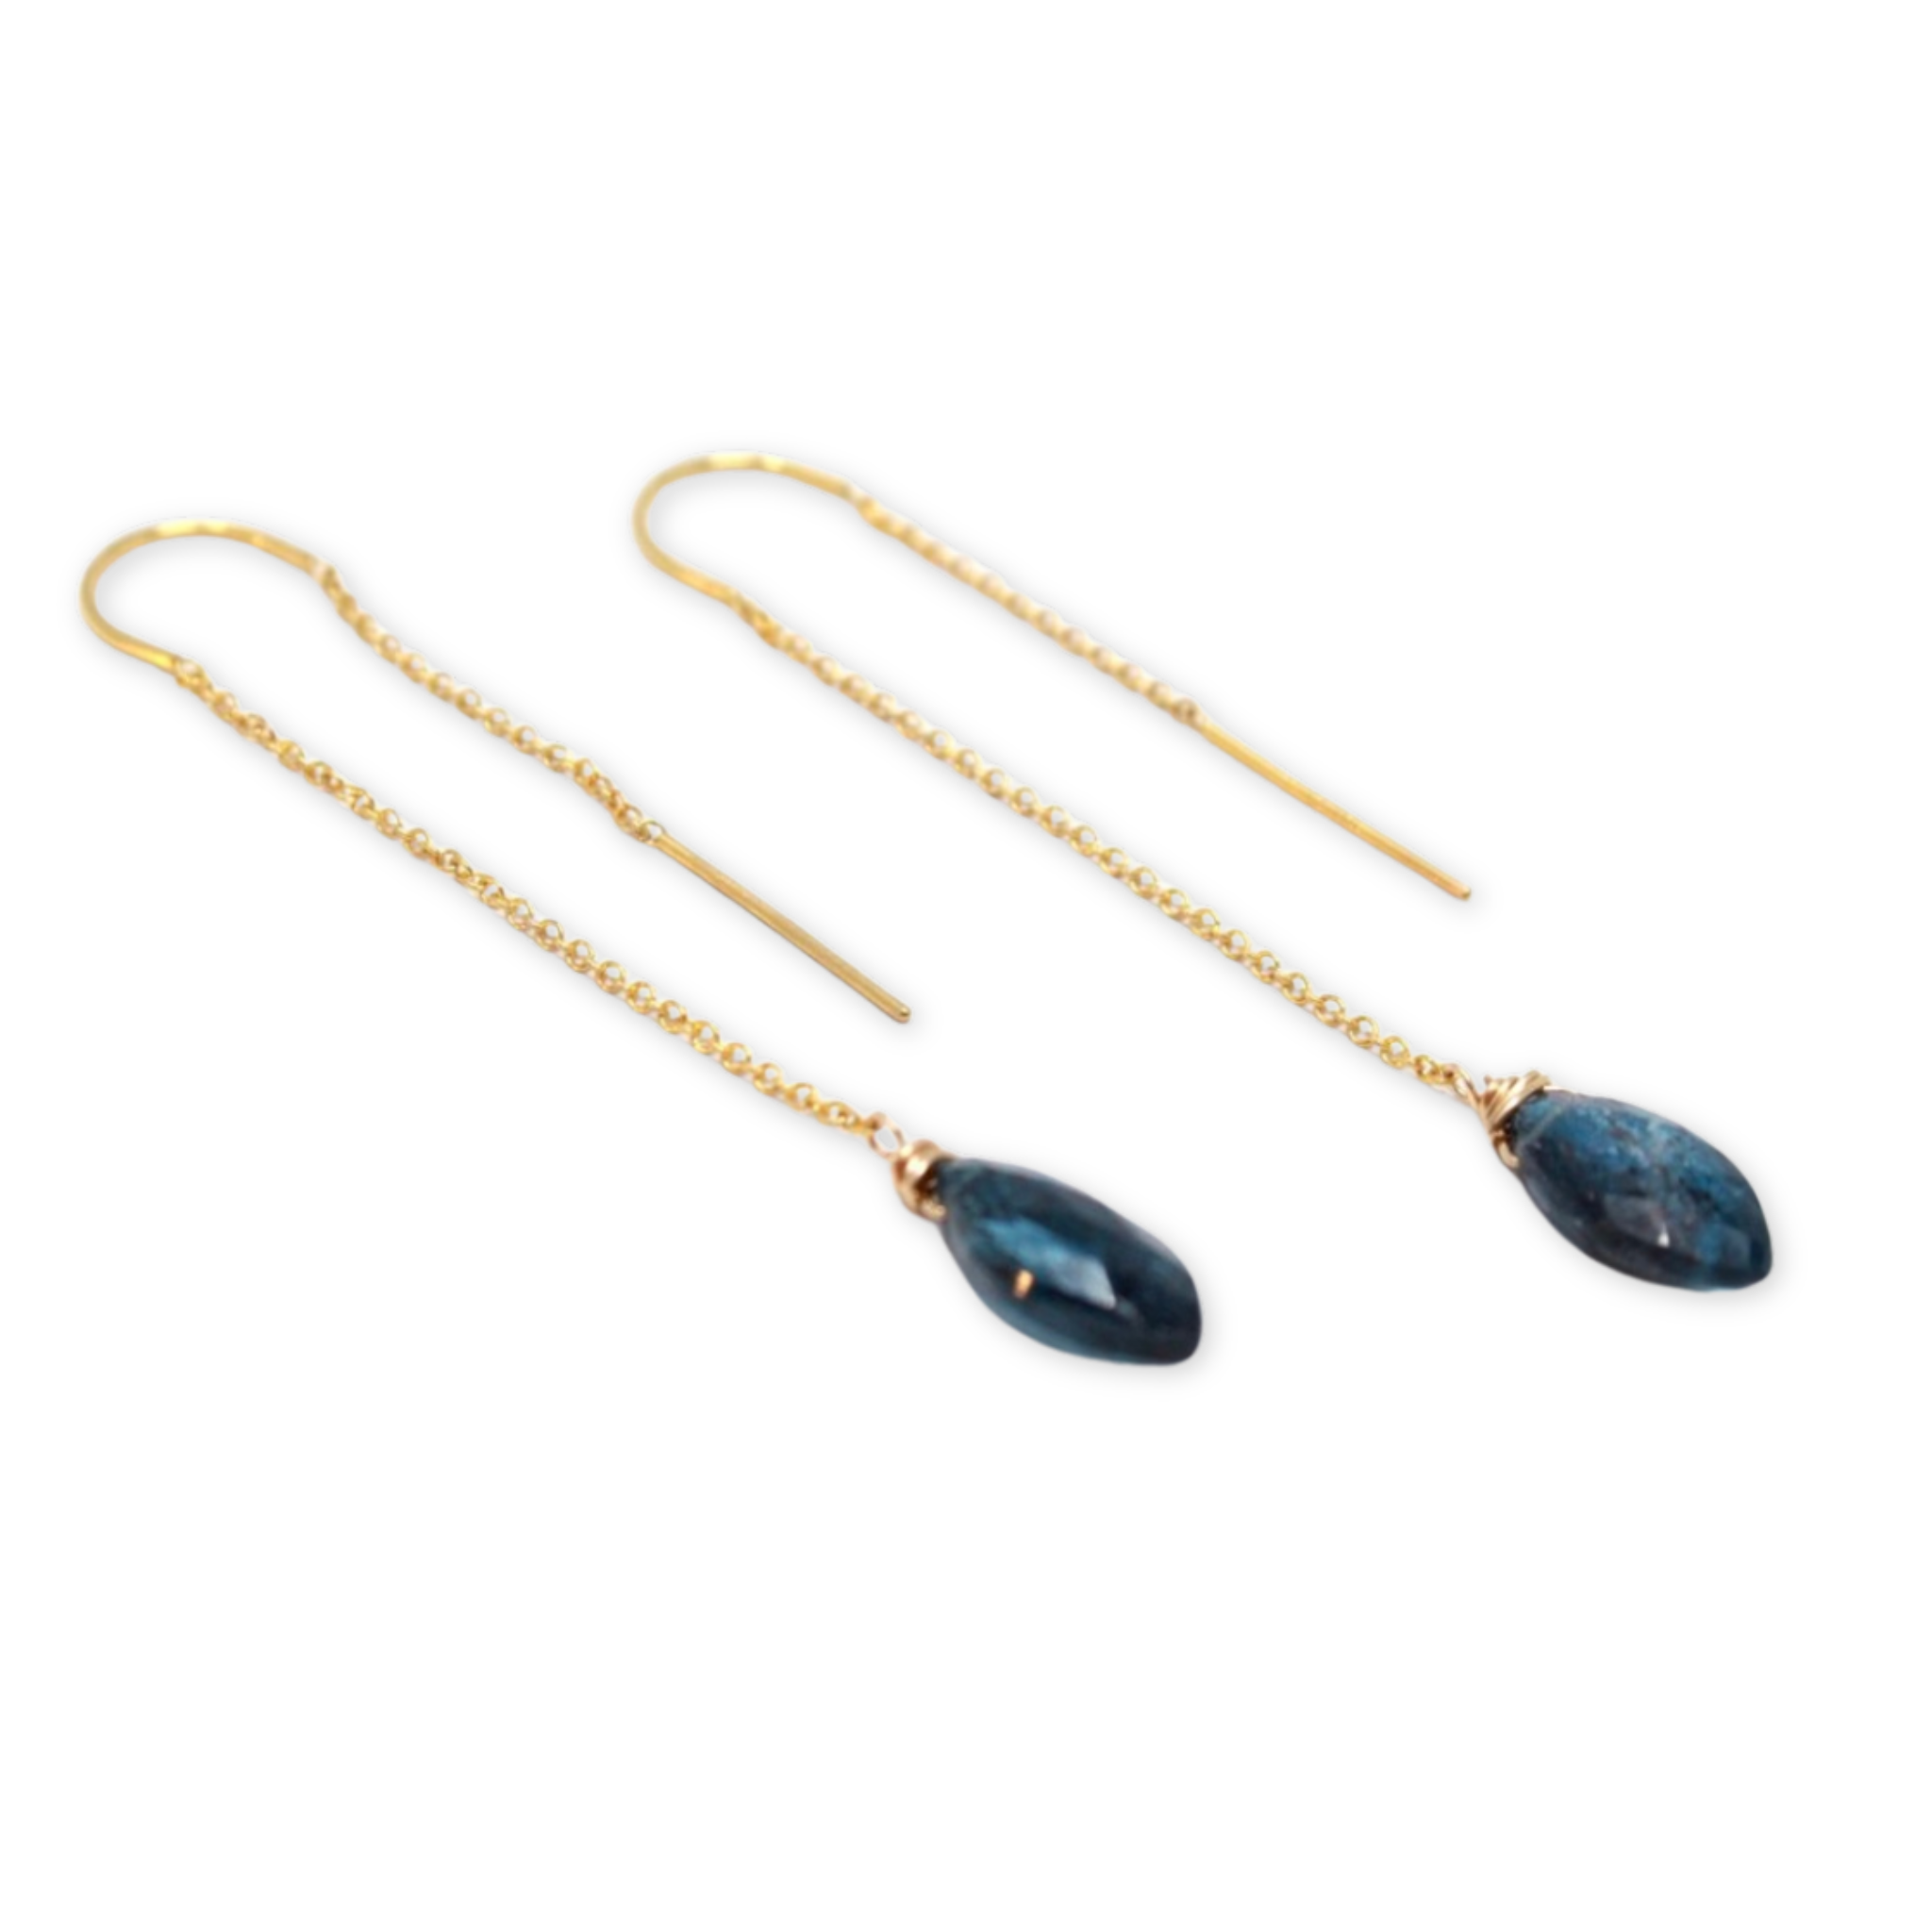 threader earrings with a kyanite stone hanging on a delicate chain